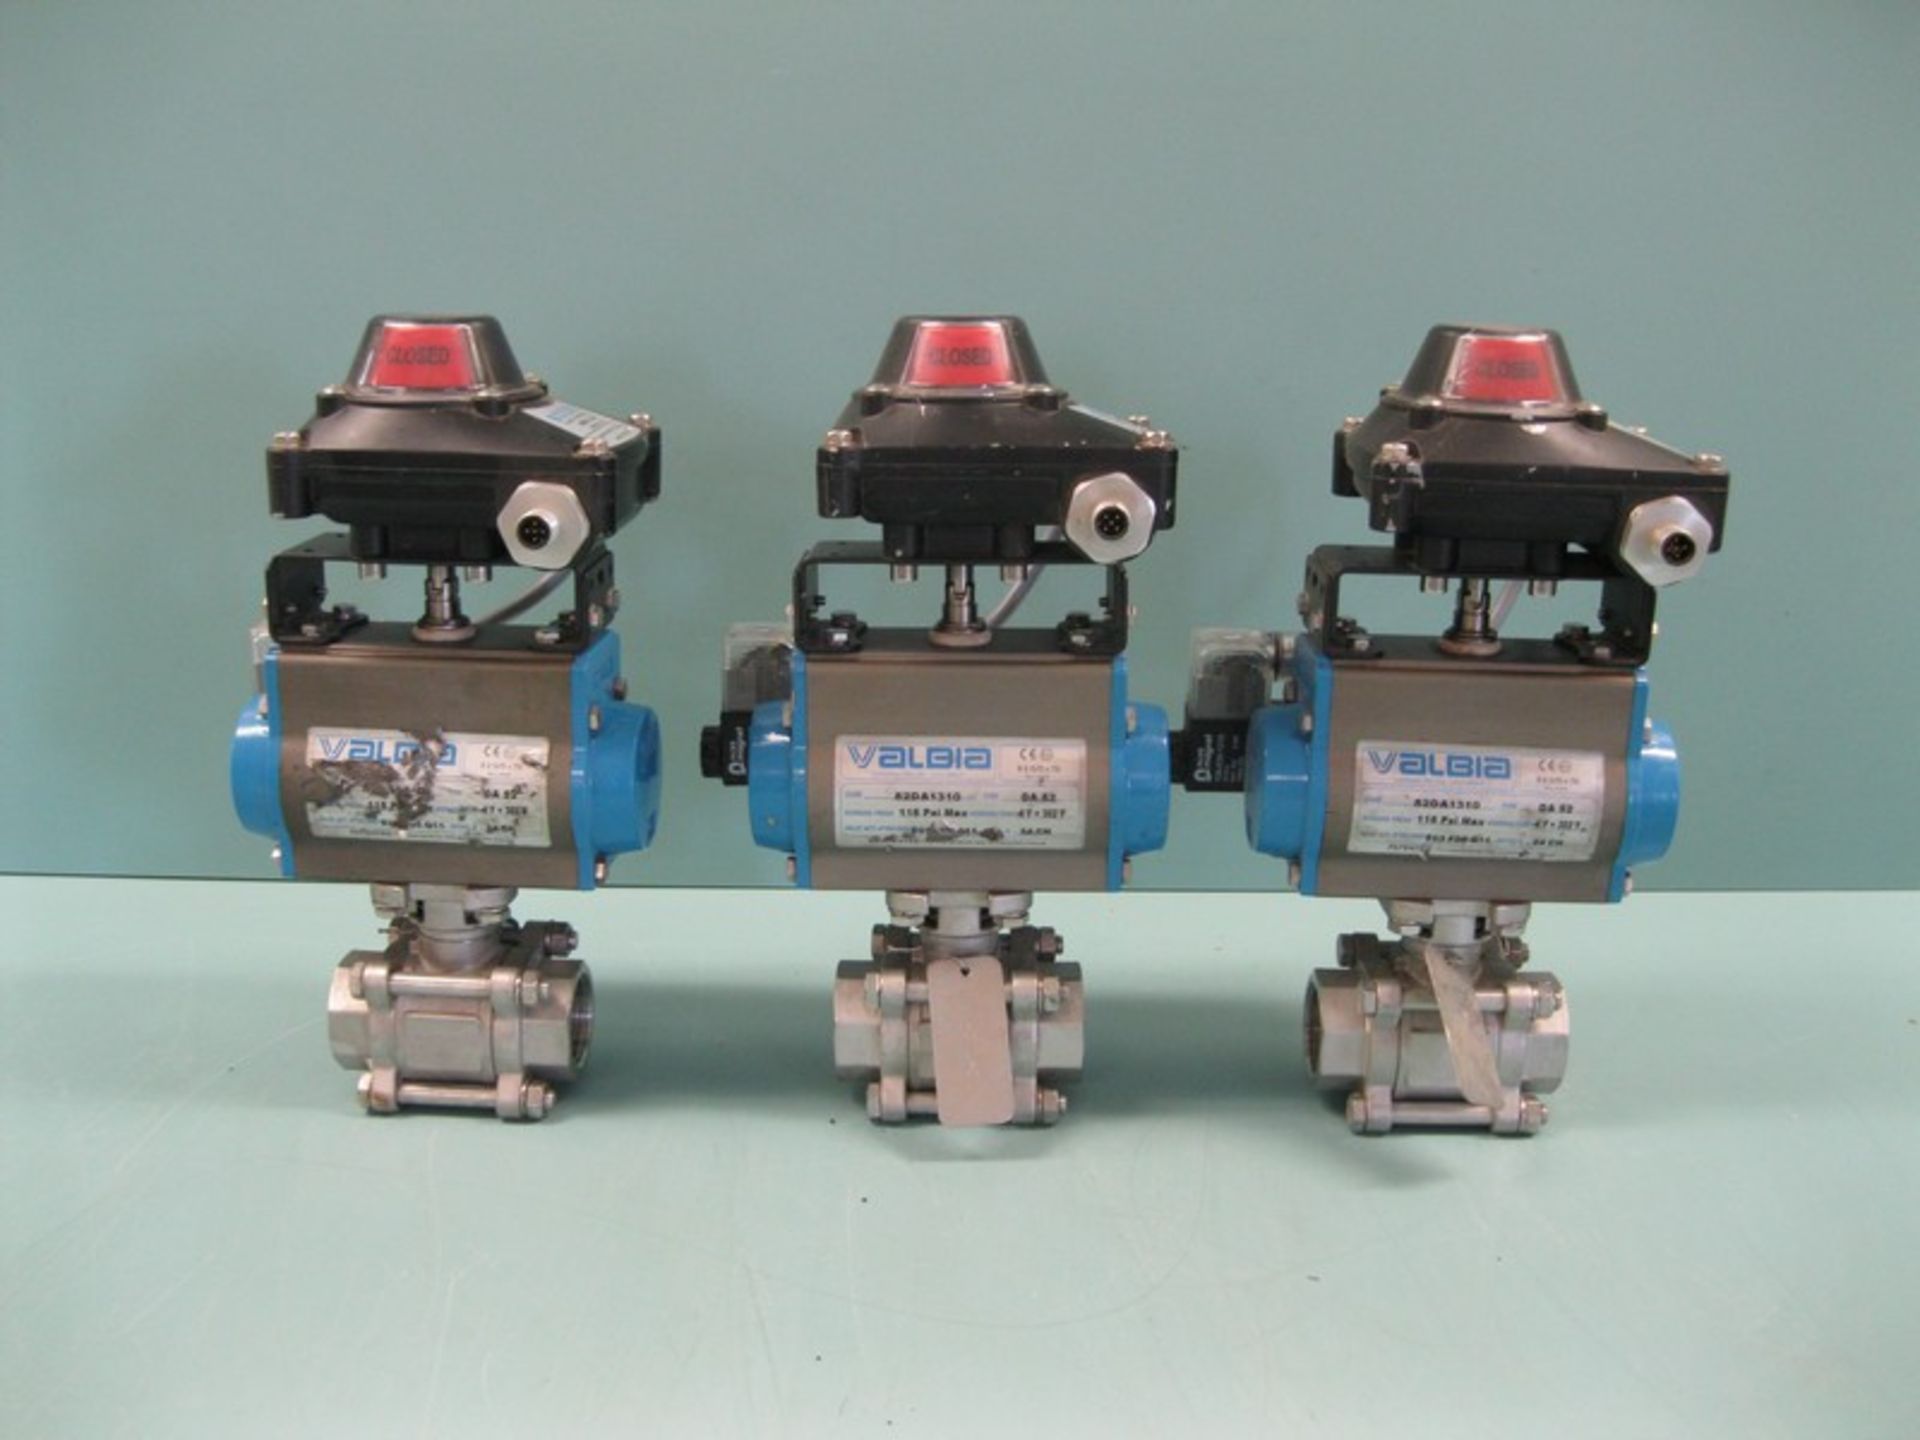 Lot (3) 1" NPT Bonomi SS Ball Valve Valbia DA 52 Actuator (NOTE: Packing and Palletizing Can Be